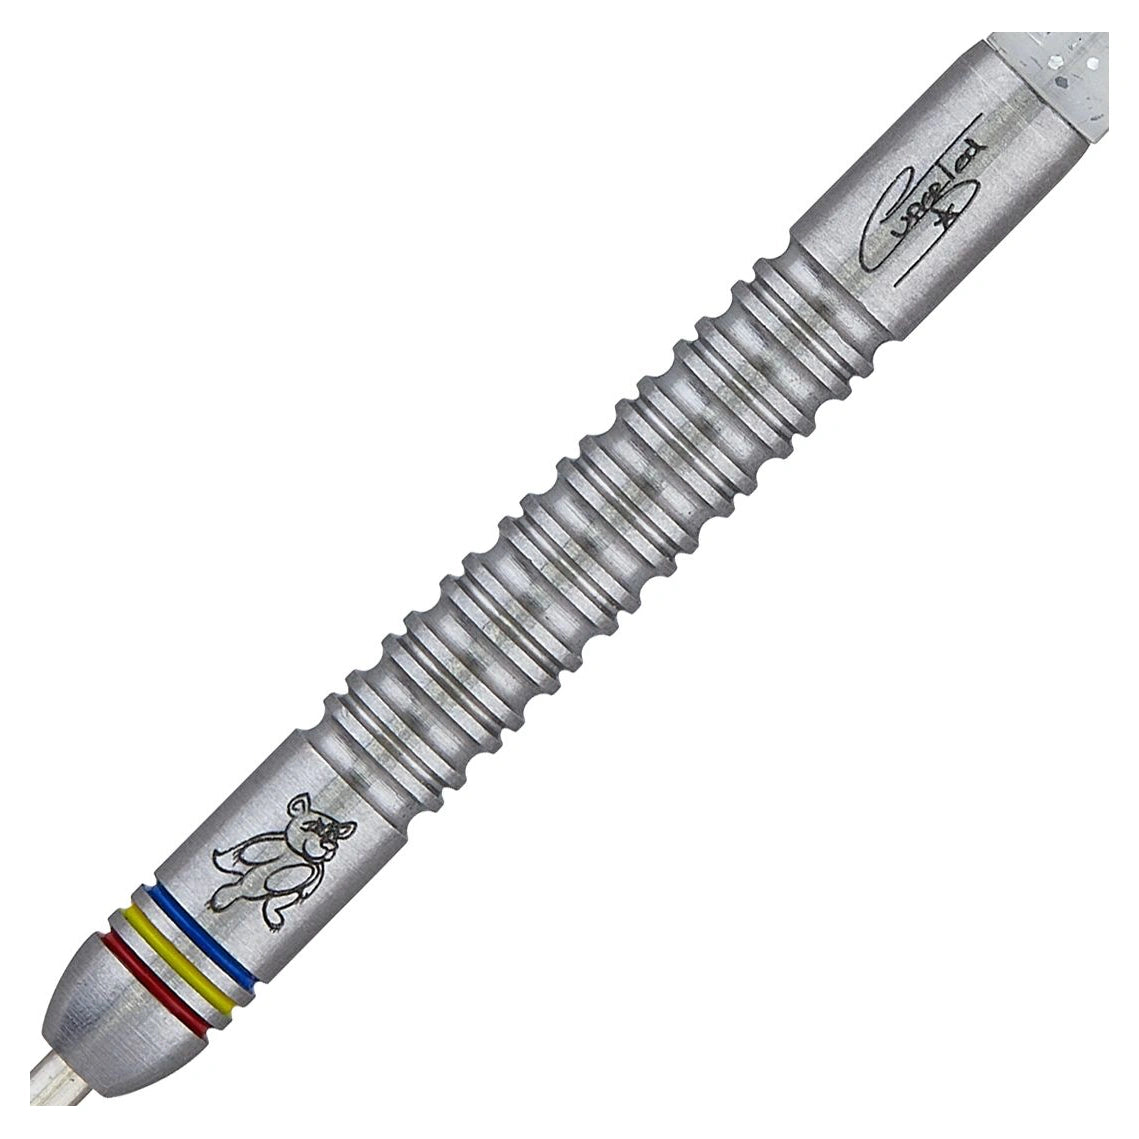 Unicorn Ted Evetts Contender Phase 2 90% Tungsten Darts 23g